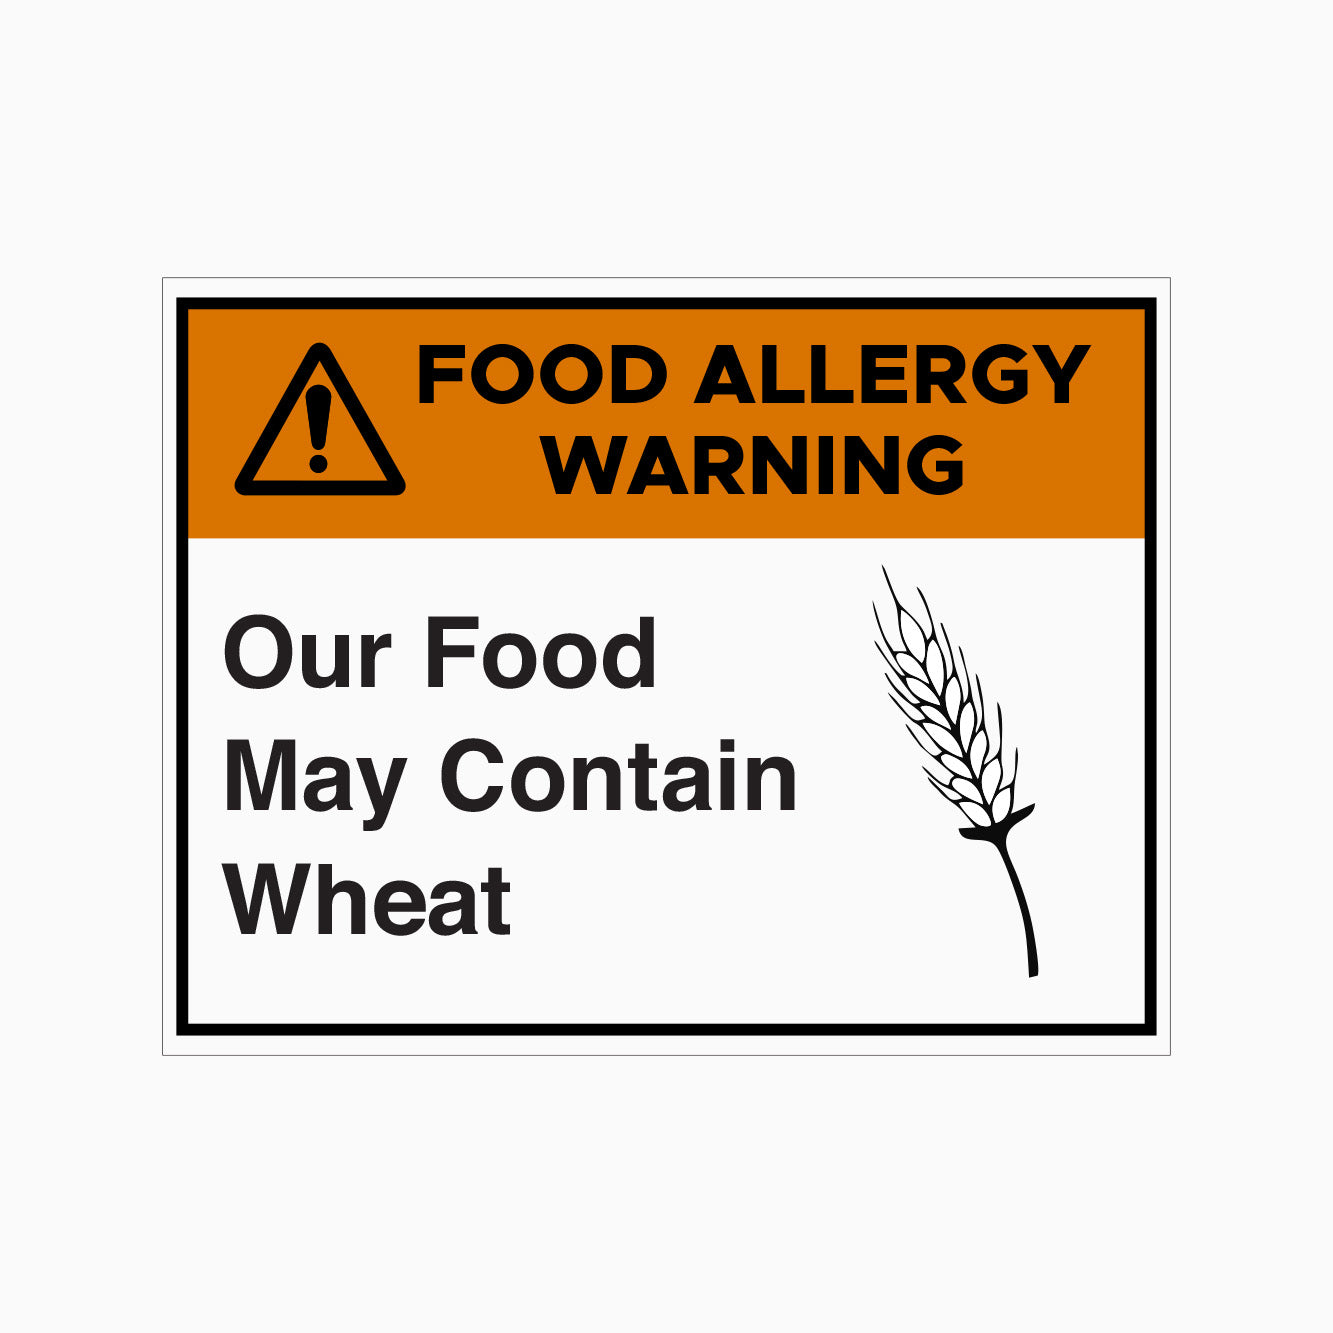 FOOD ALLERGY WARNING SIGN - OUR FOOD MAY CONTAIN WHEAT SIGN